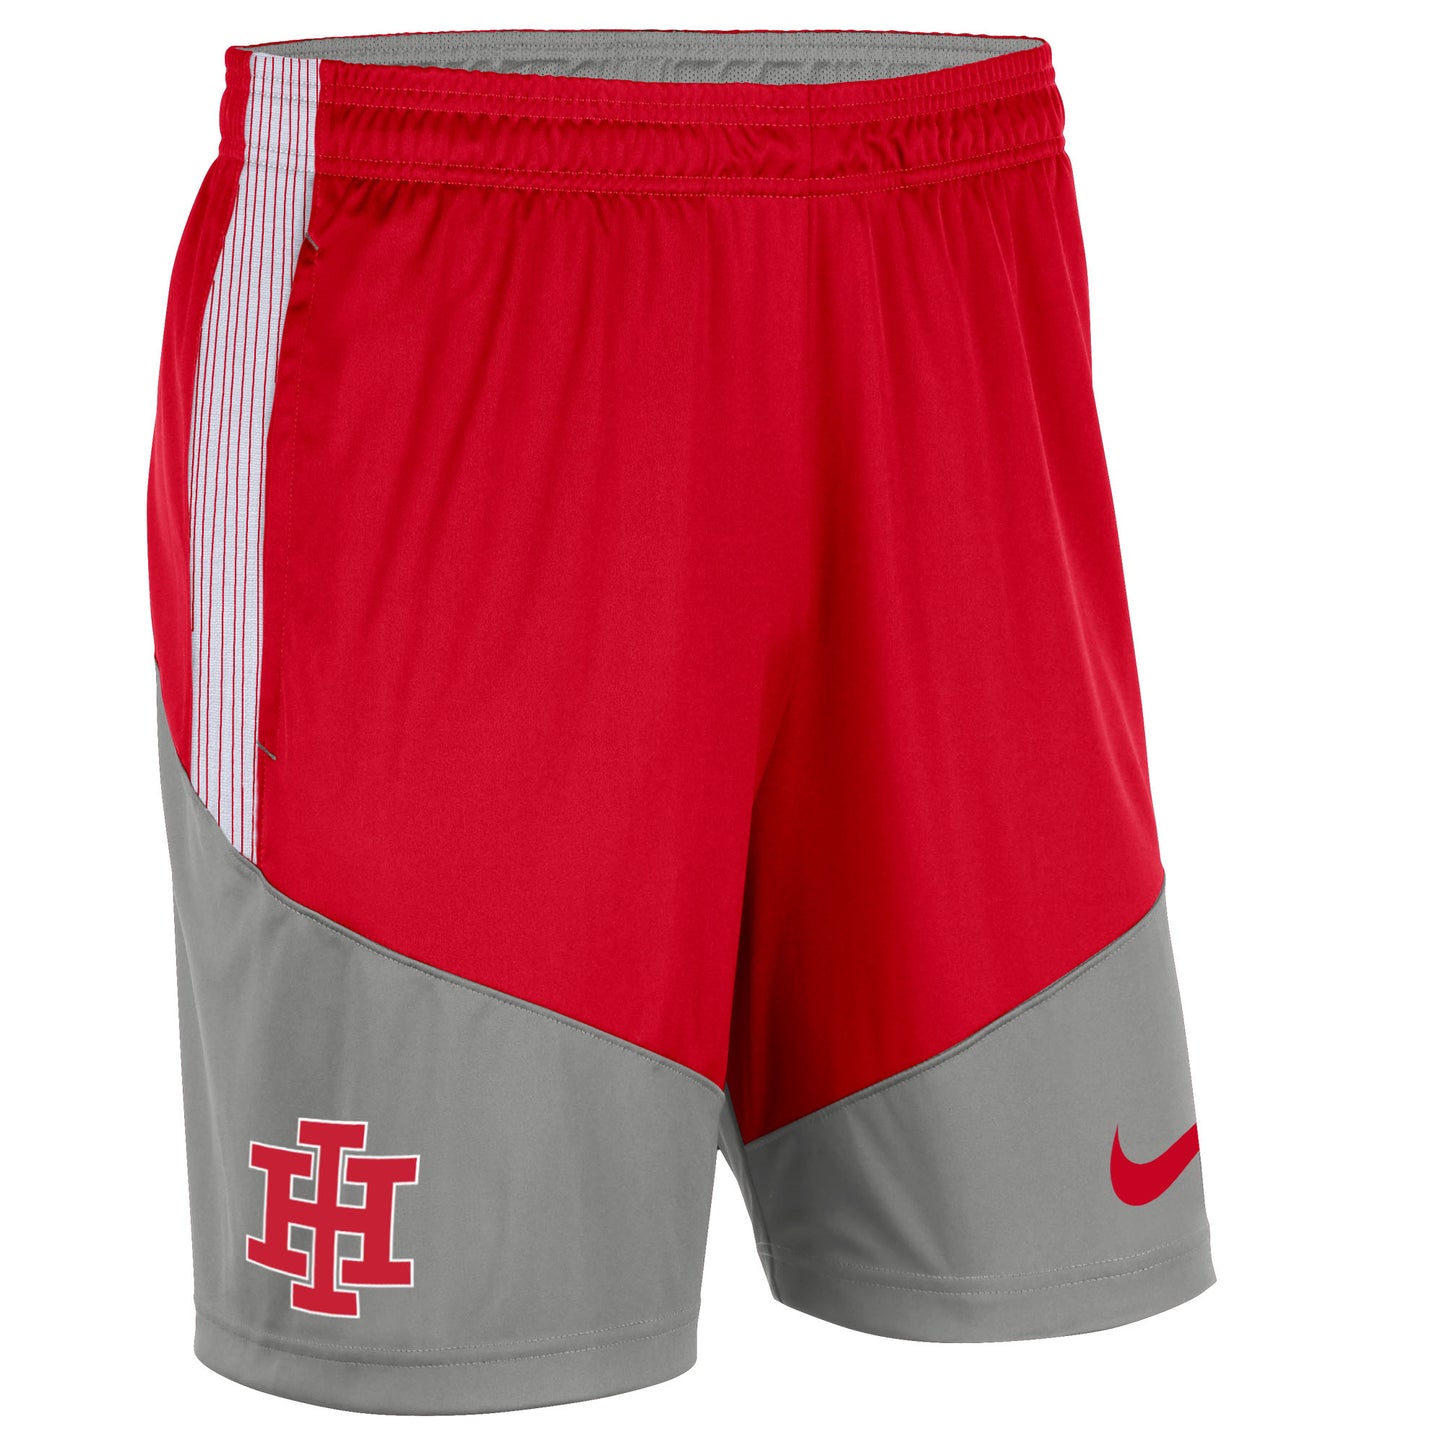 Nike Adult Player Short - Red/White